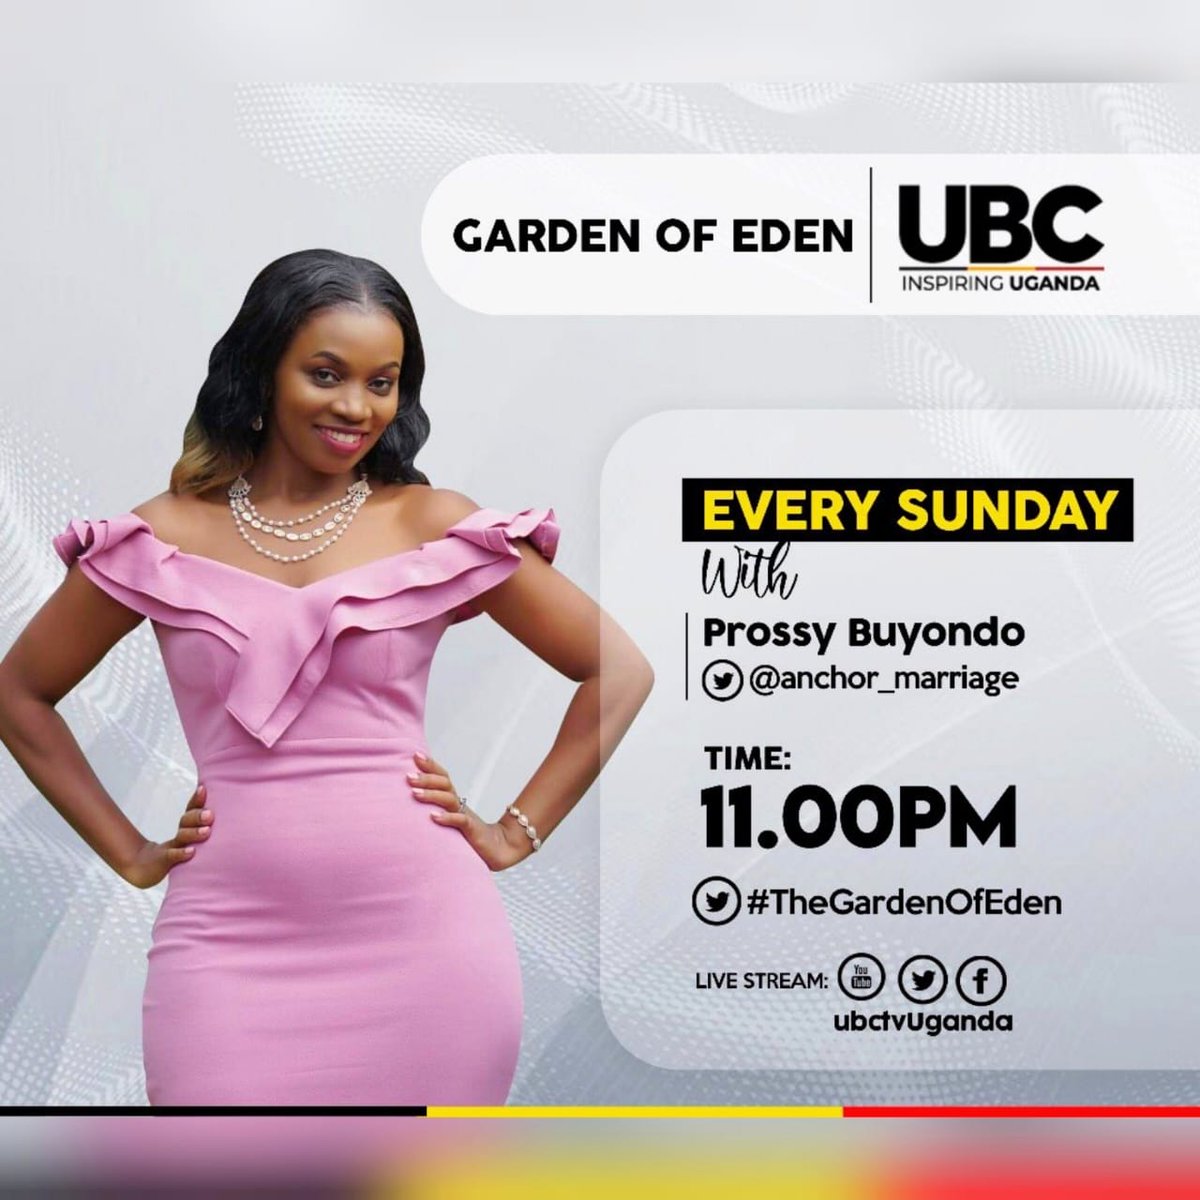 COMING UP TONIGHT AT 11PM
#TheGardenOfEdenTvShow 

Join The Marriage Anchor Tonight as she discusses #EmotionalDetachment in relationships and how to remain attached to the one you love. 

Tonight at 11pm 
On @ubctvuganda
Watch Online on our YouTube Channel at Marriage Anchor.